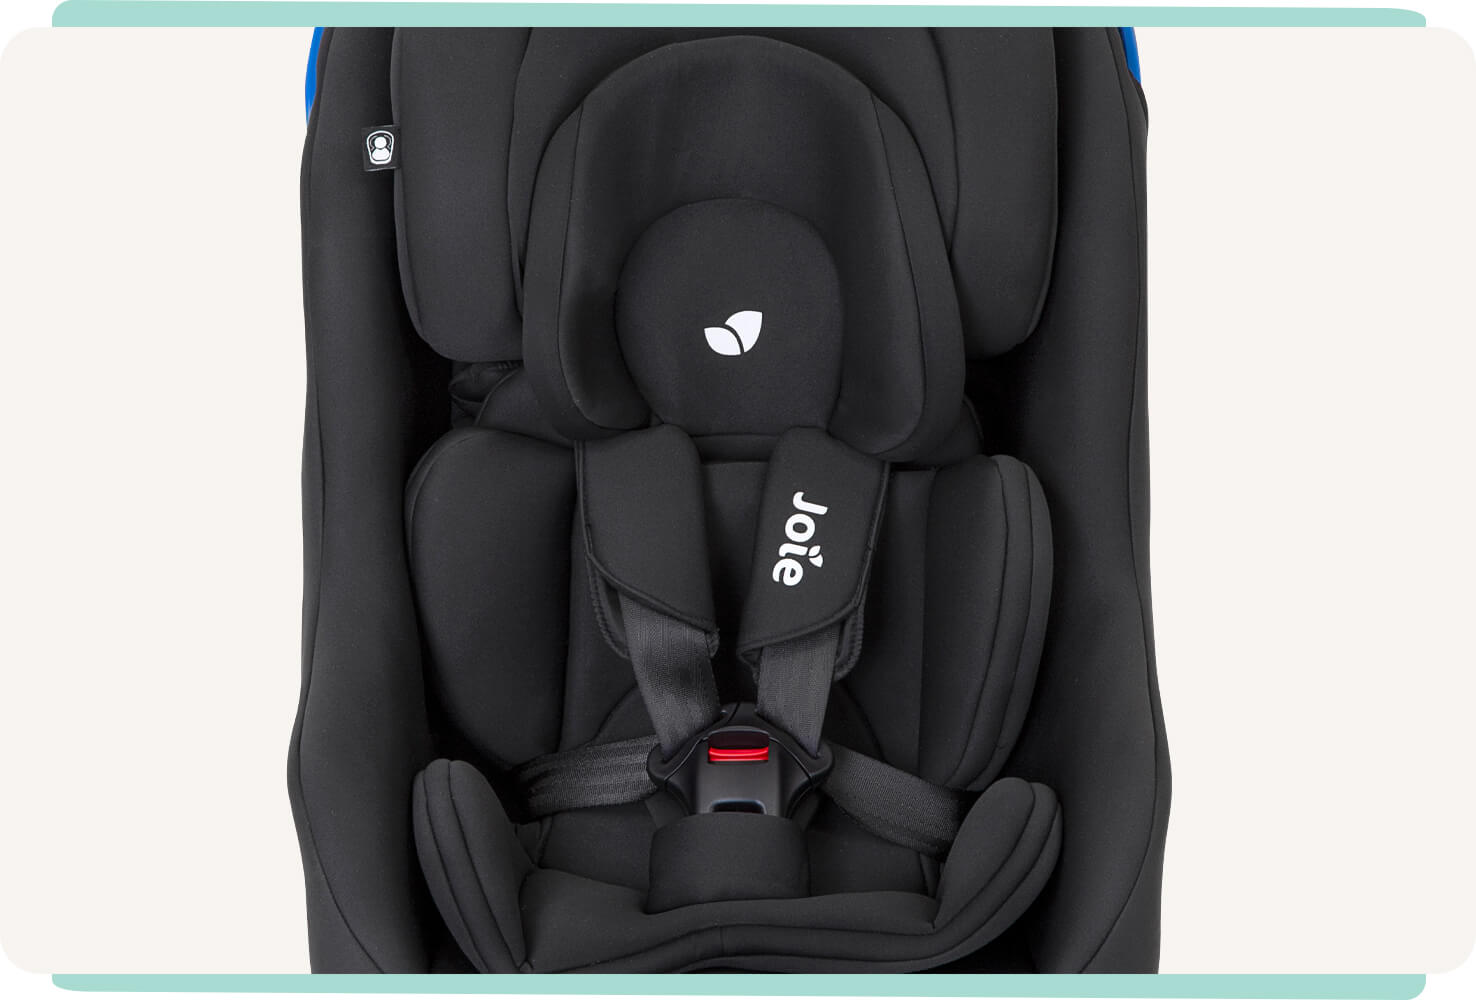 Joie Steadi car seat with harness clipped in with a black colour, and facing forward with infant insert.